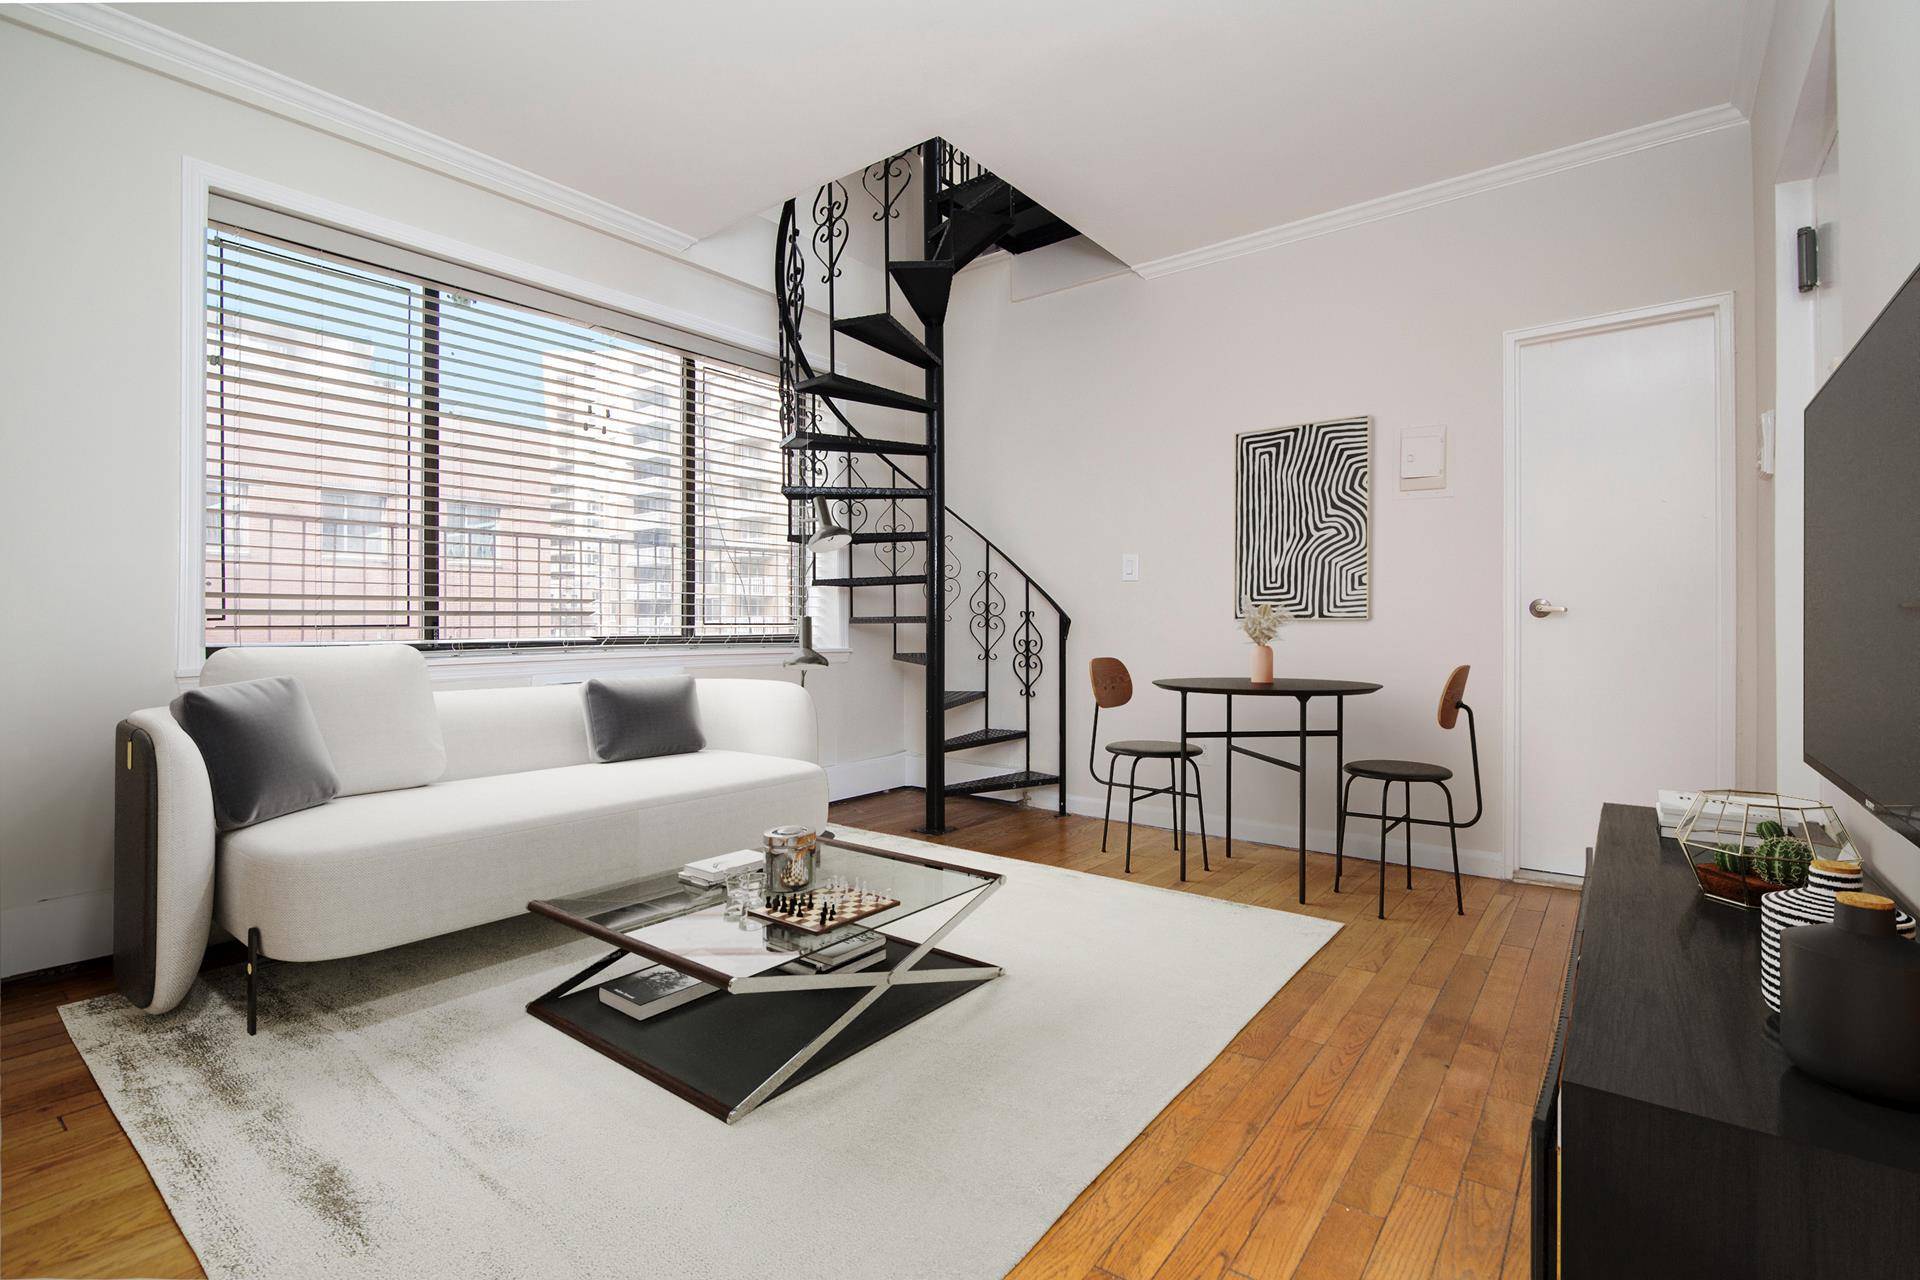 Welcome to this one of a kind 1 bedroom, 1 bathroom duplex with a private roofdeck.